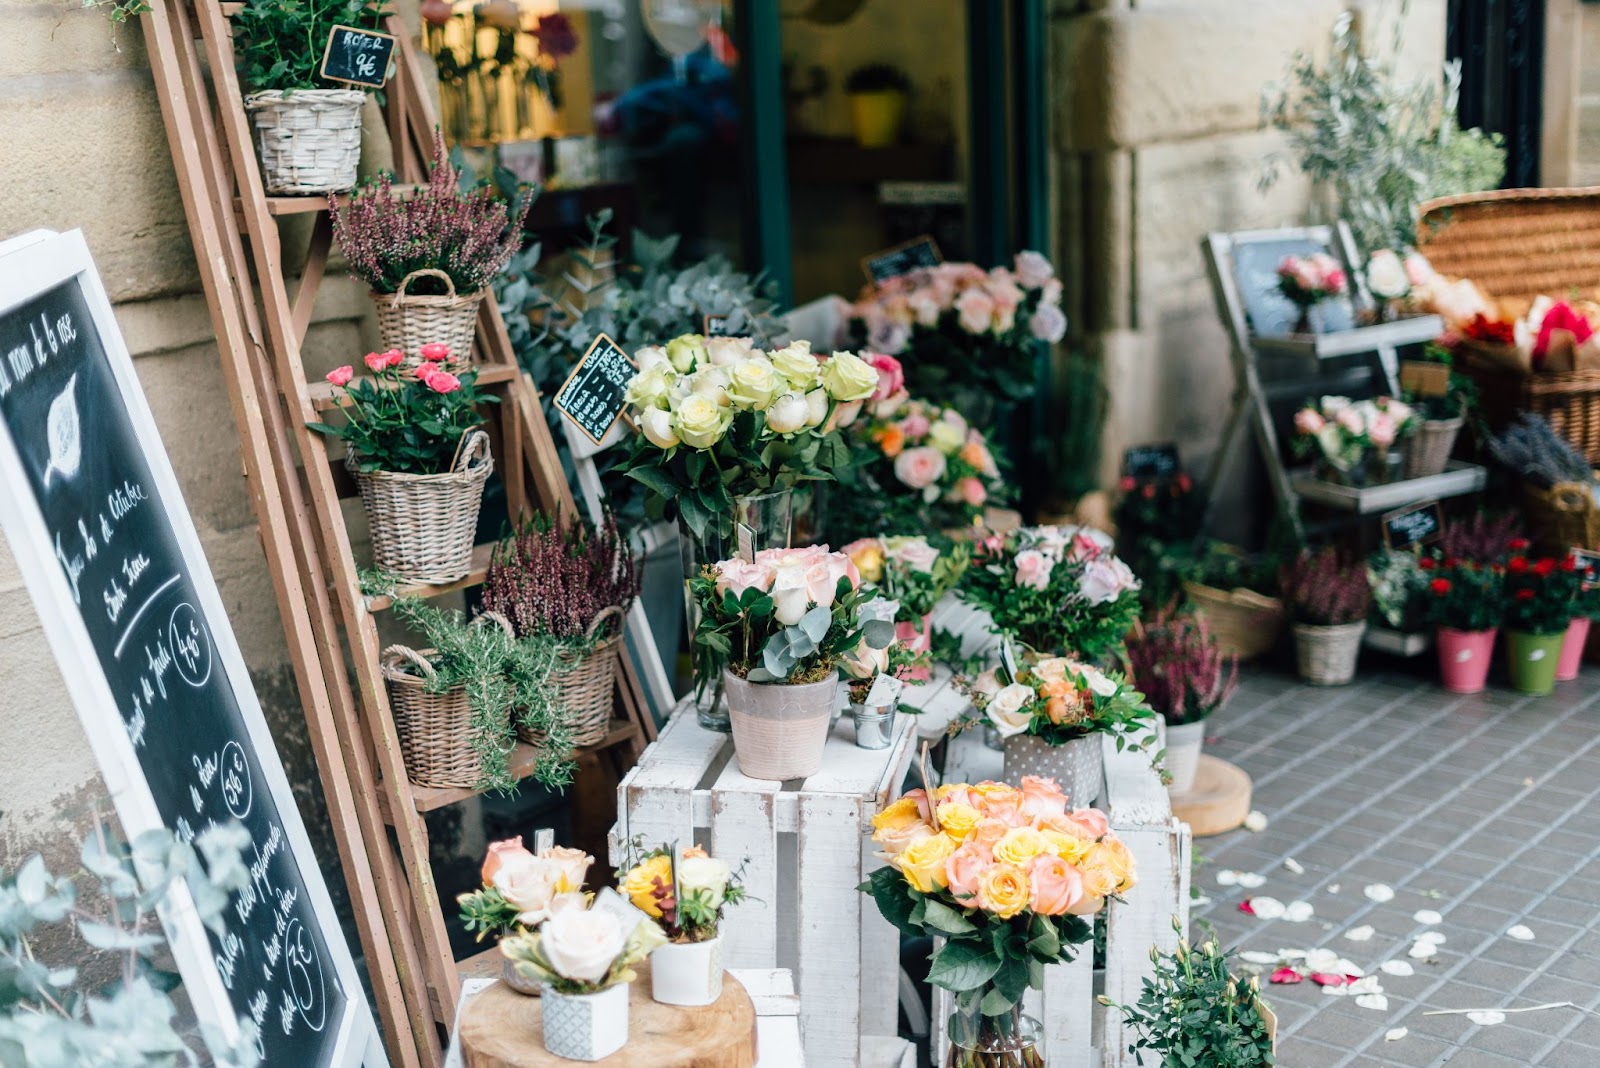 Florist exterior filled with flowers